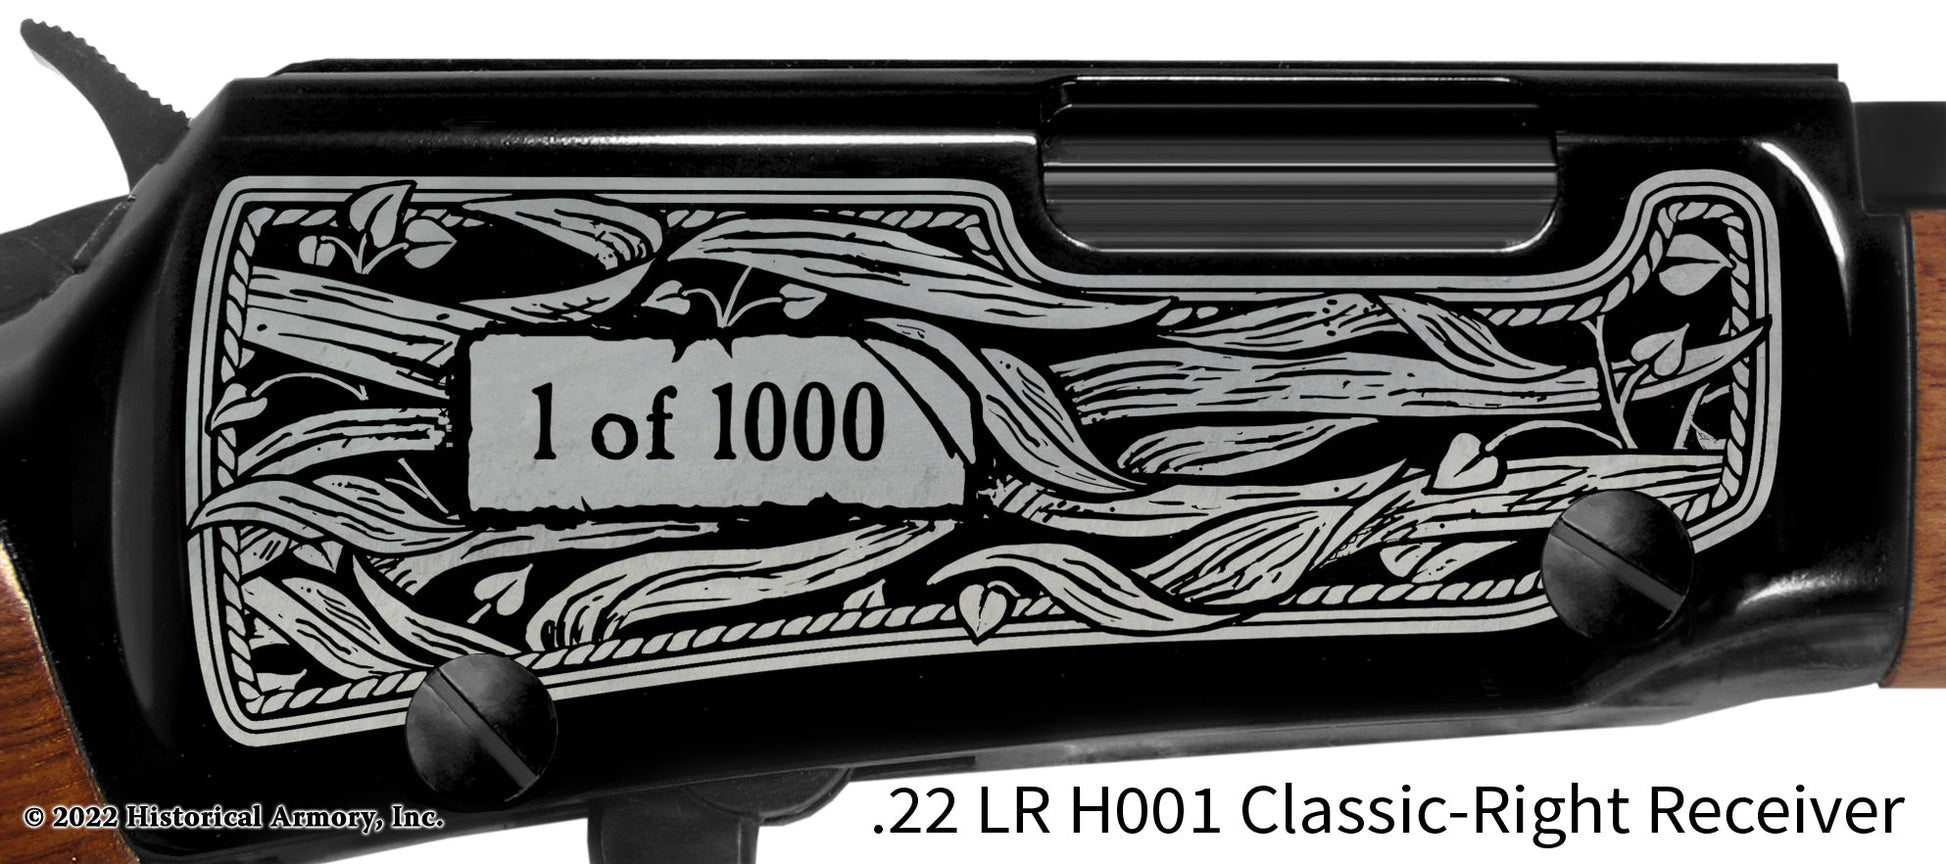 Wisconsin Agricultural Heritage Engraved Henry H001 Rifle